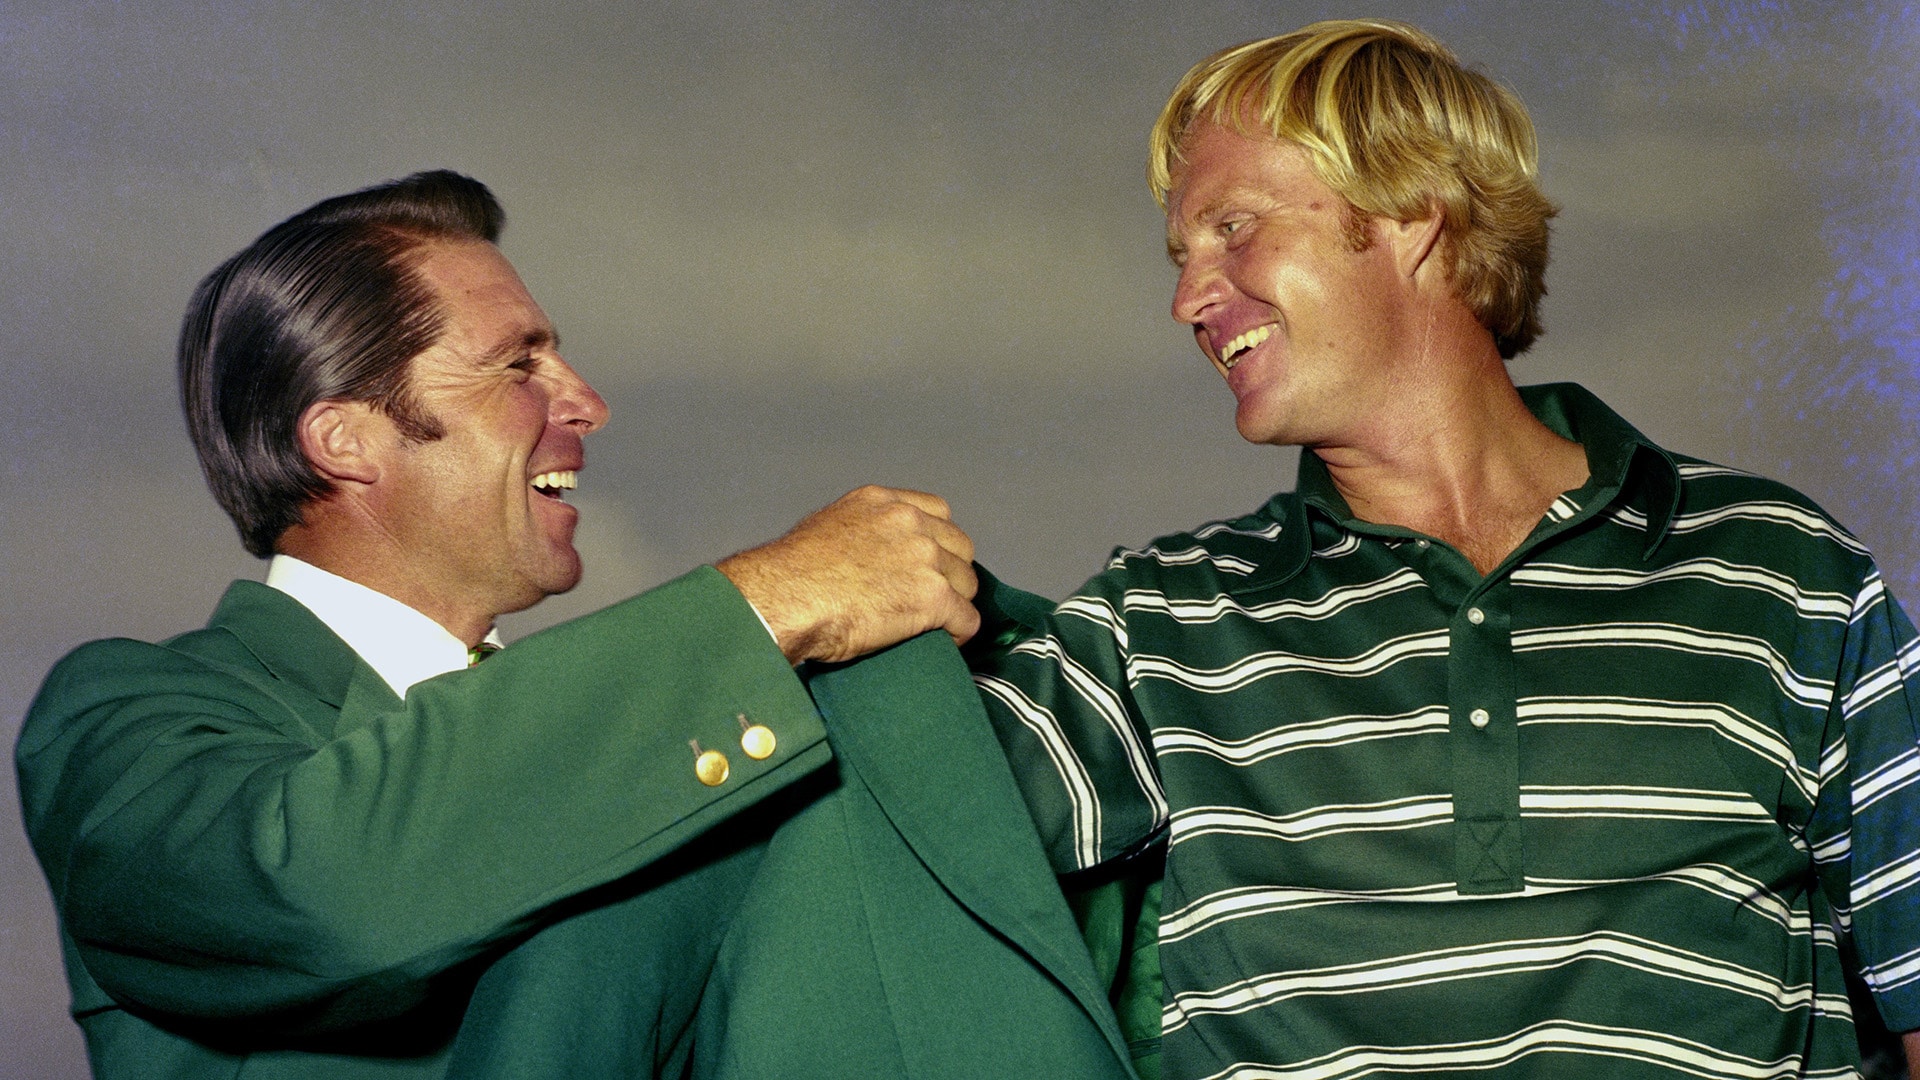 Like Gary Player, Jack Nicklaus listed the Masters as No. 4 among the majors